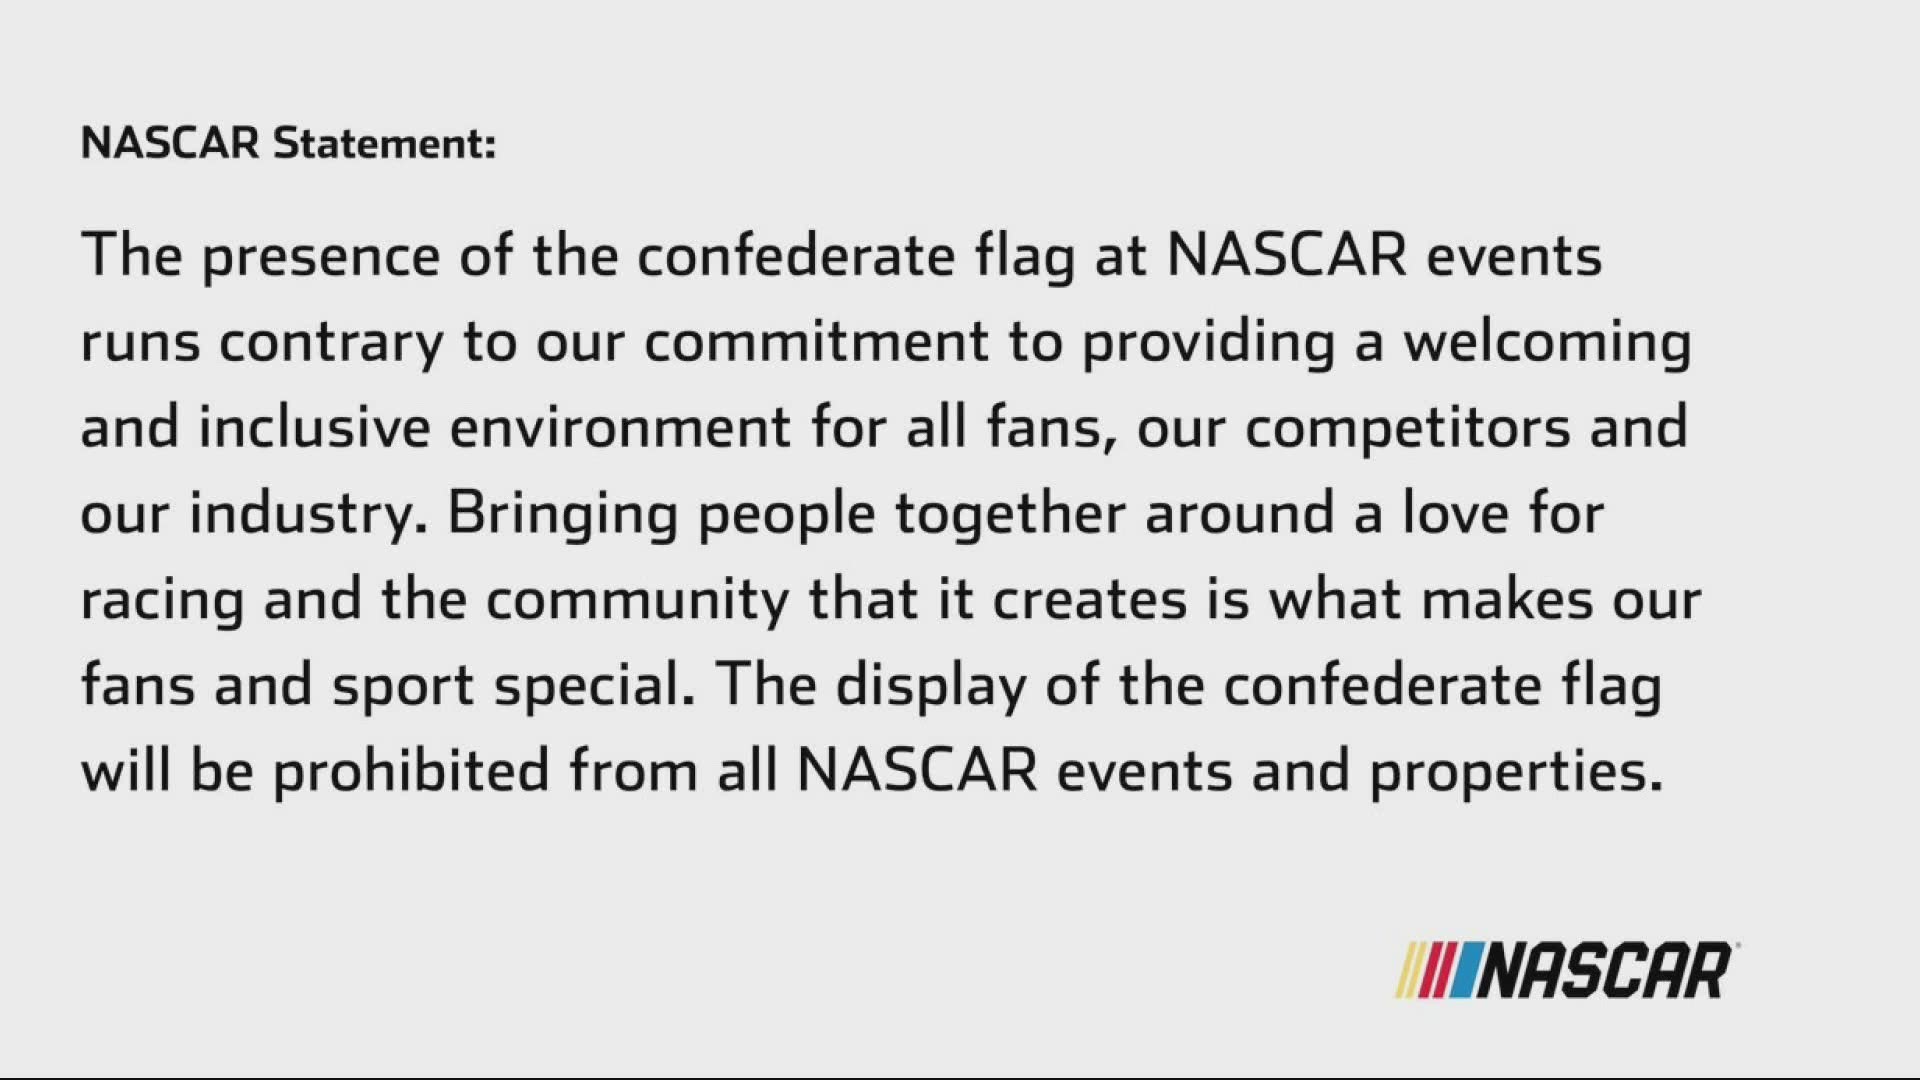 Wednesday night, NASCAR releases a statement that says the presence of the confederate flag at events does not stand to their brand.